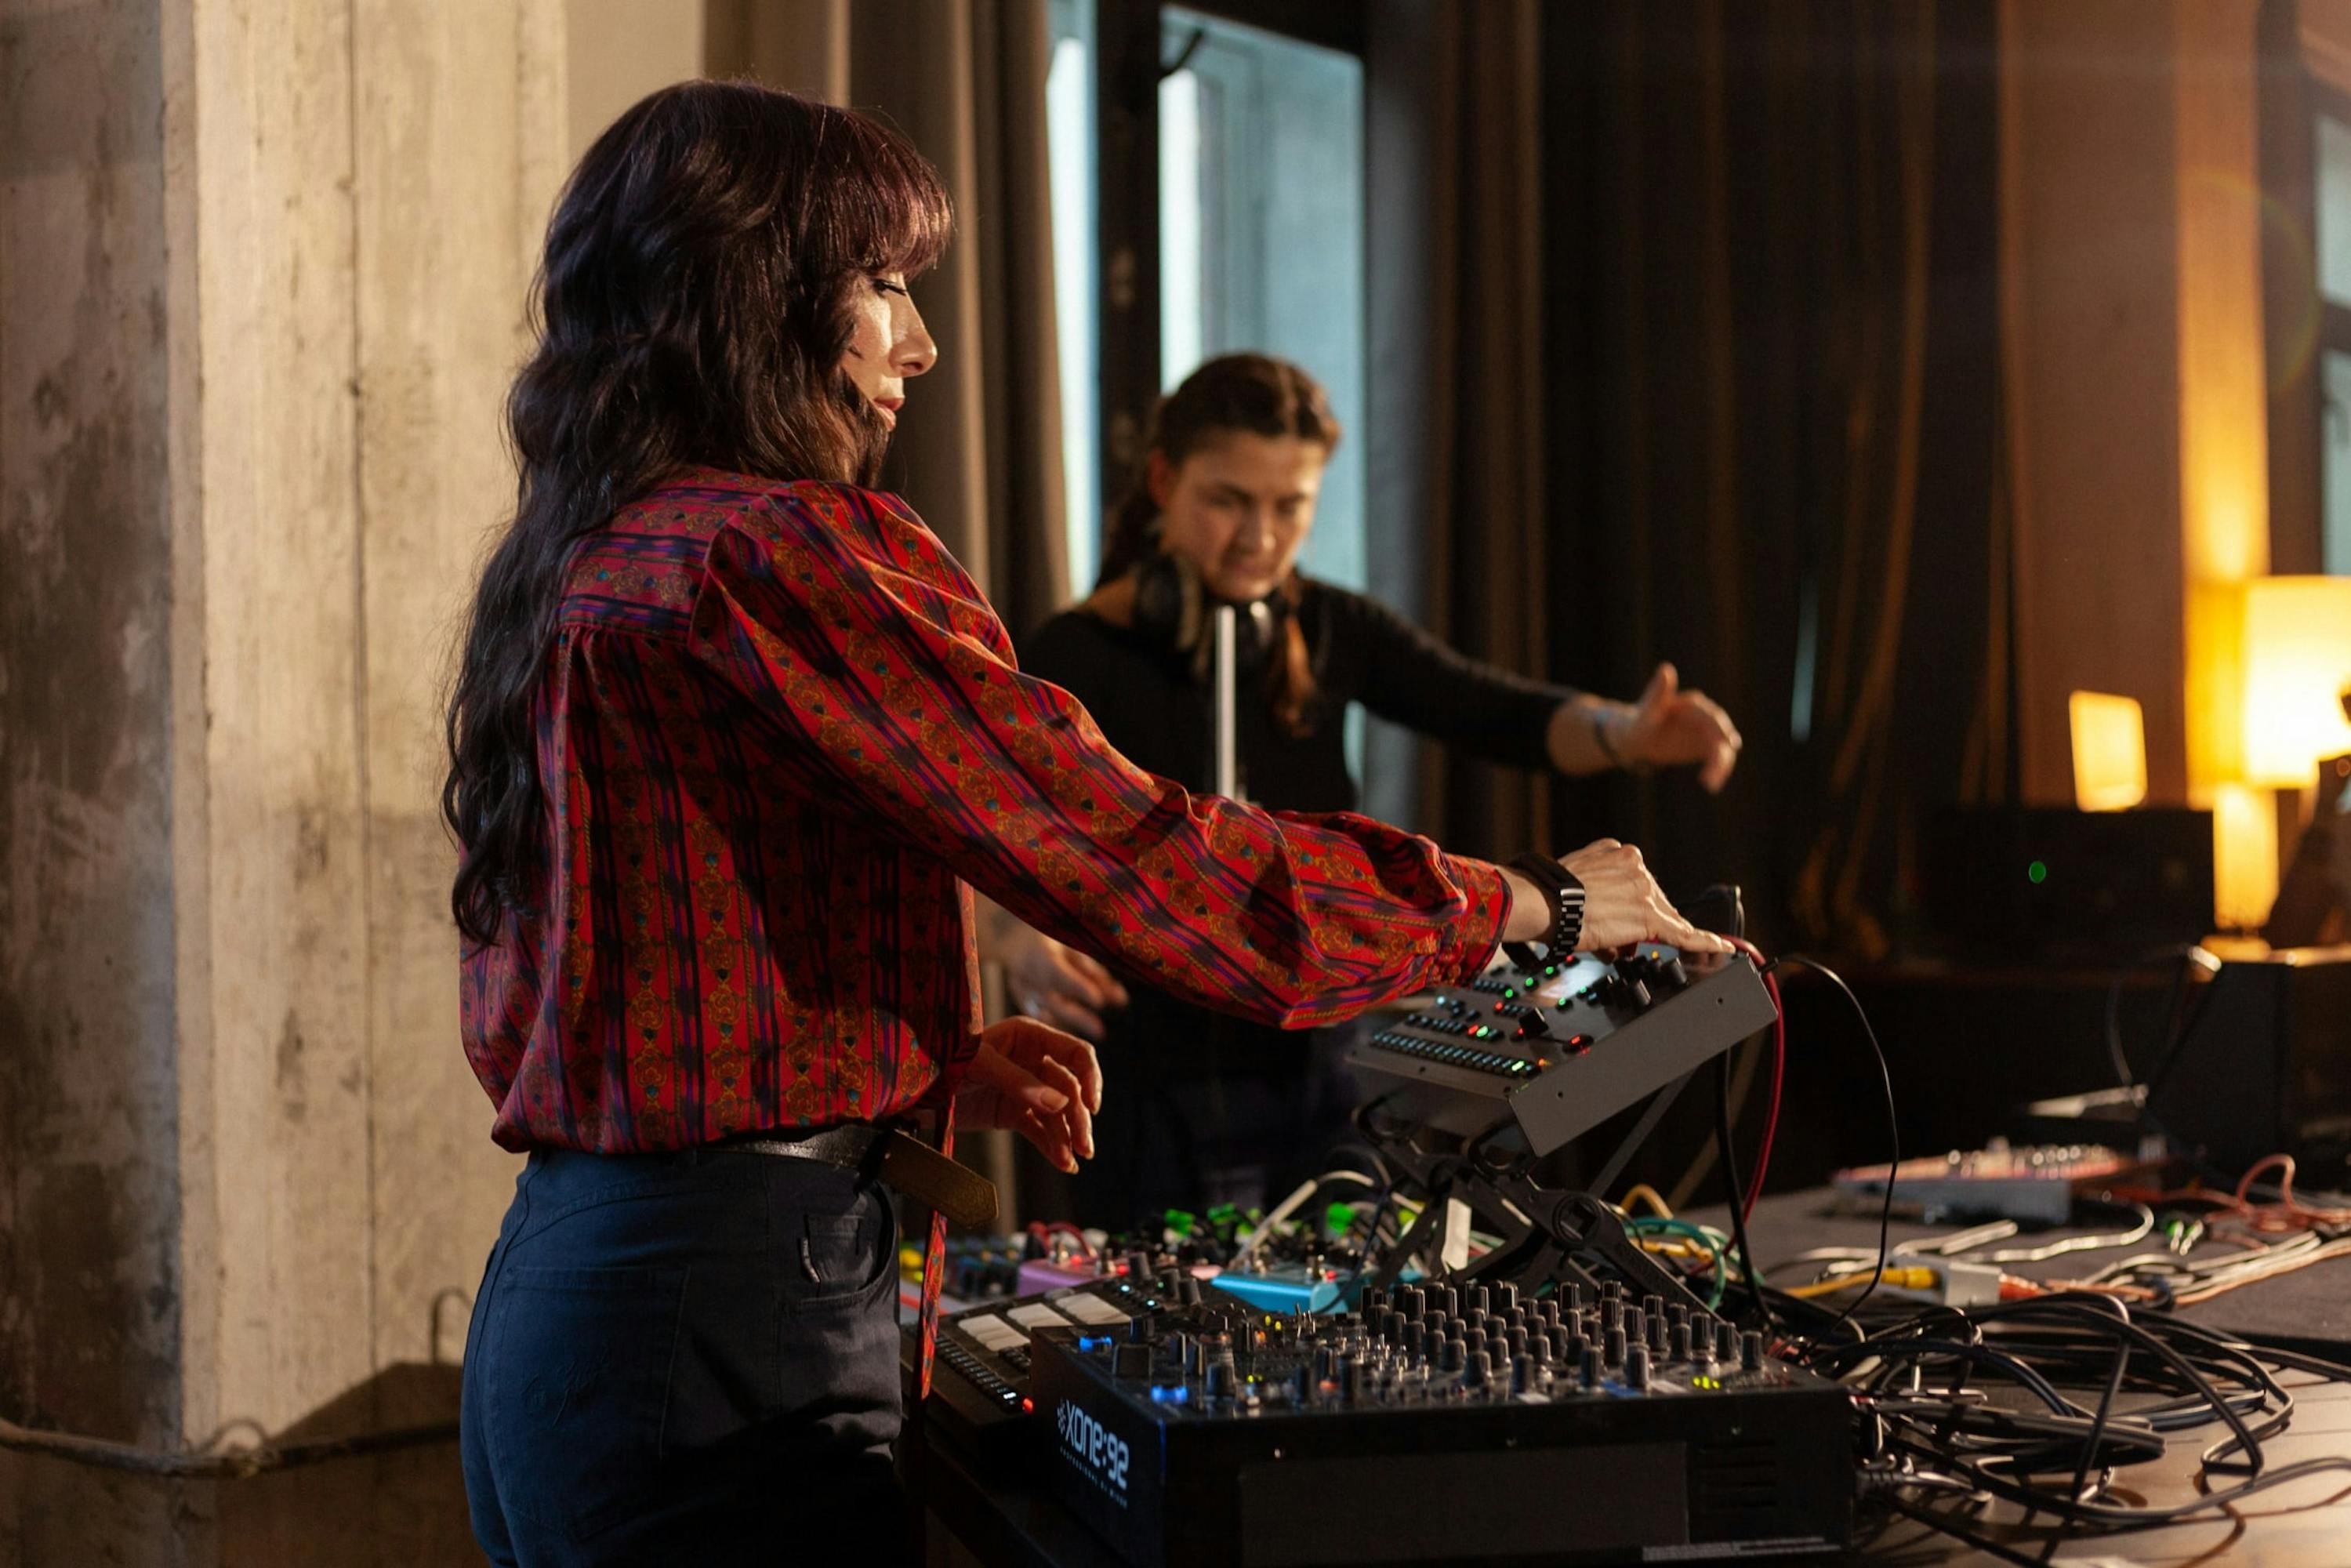 Lady Starlight and Sarah Kivi live in a jam session